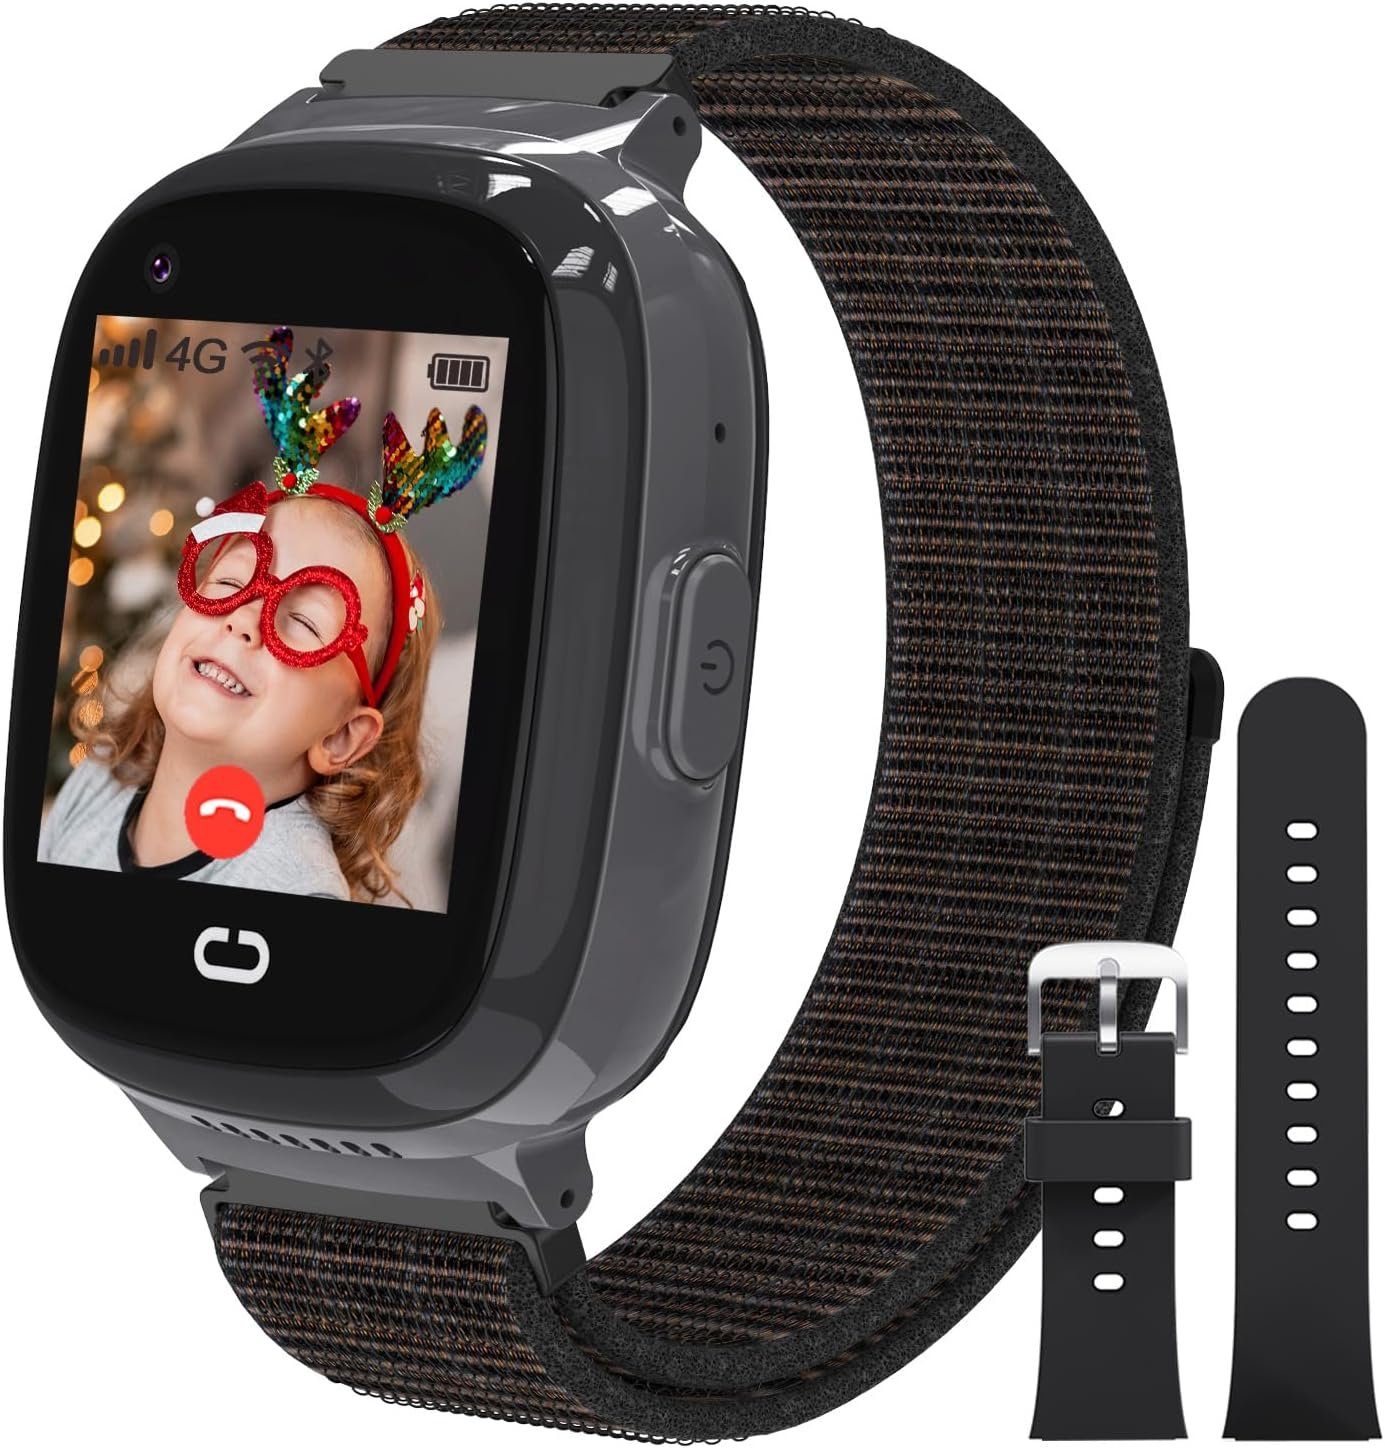 PTHTECHUS Smartwatch (1,44 Zoll, Android iOS), Telefon 4G Videoanruf Uhr WiFi Anrufe Schulmodus SOS-Funktion Wecker